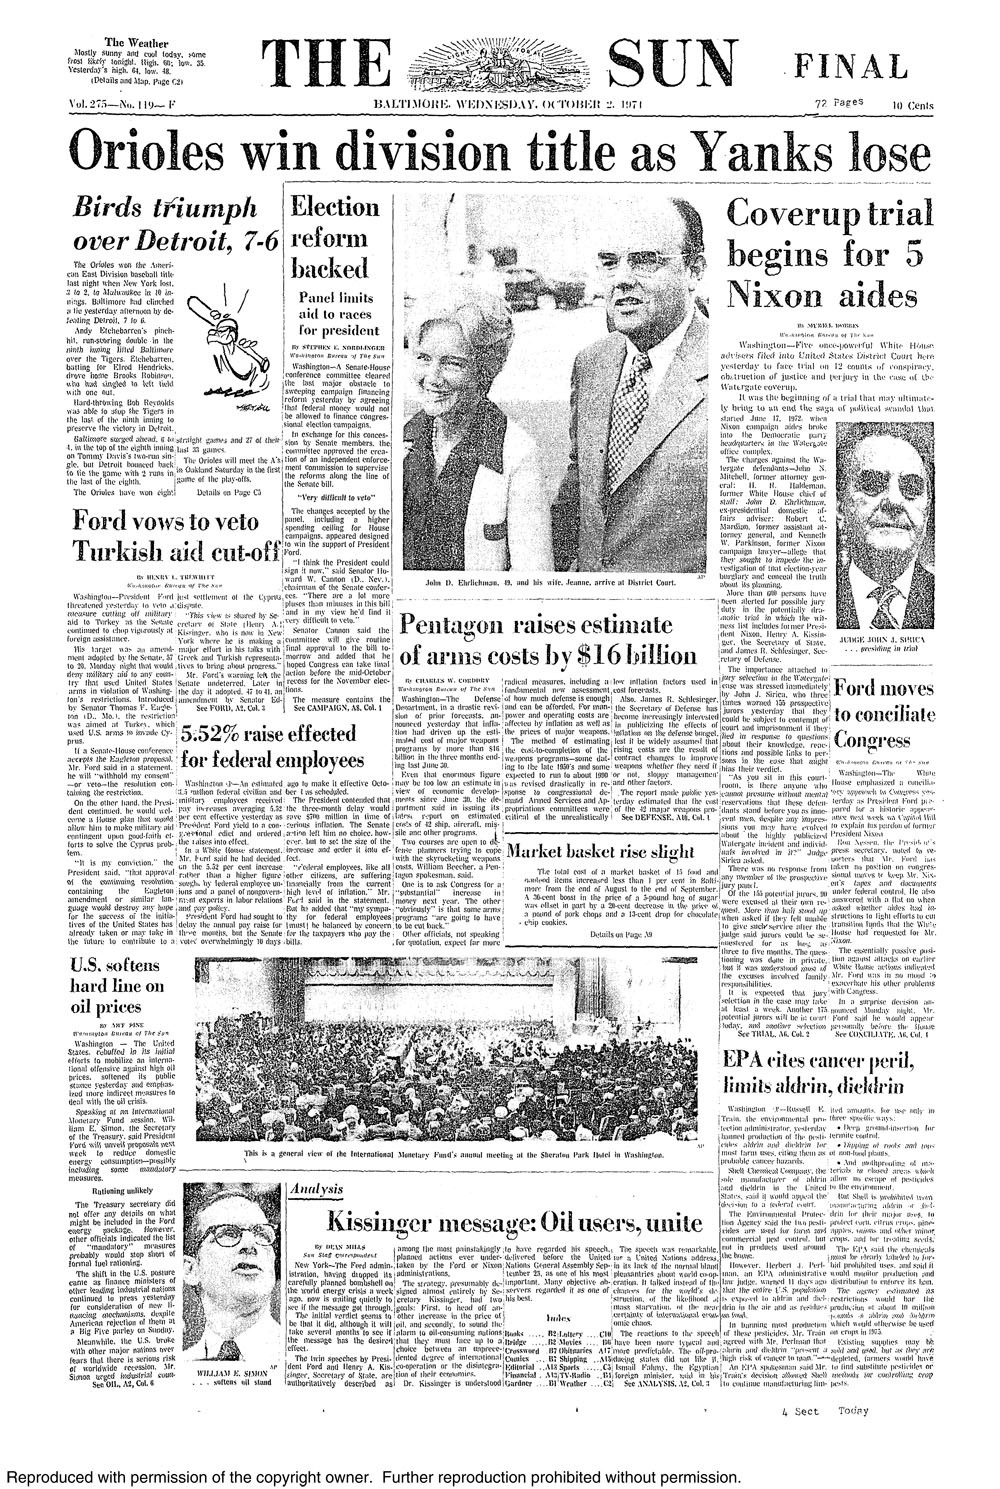 The Sun Front Page: October 2, 1974 Click on the newspaper above to get a closer view of the front page.